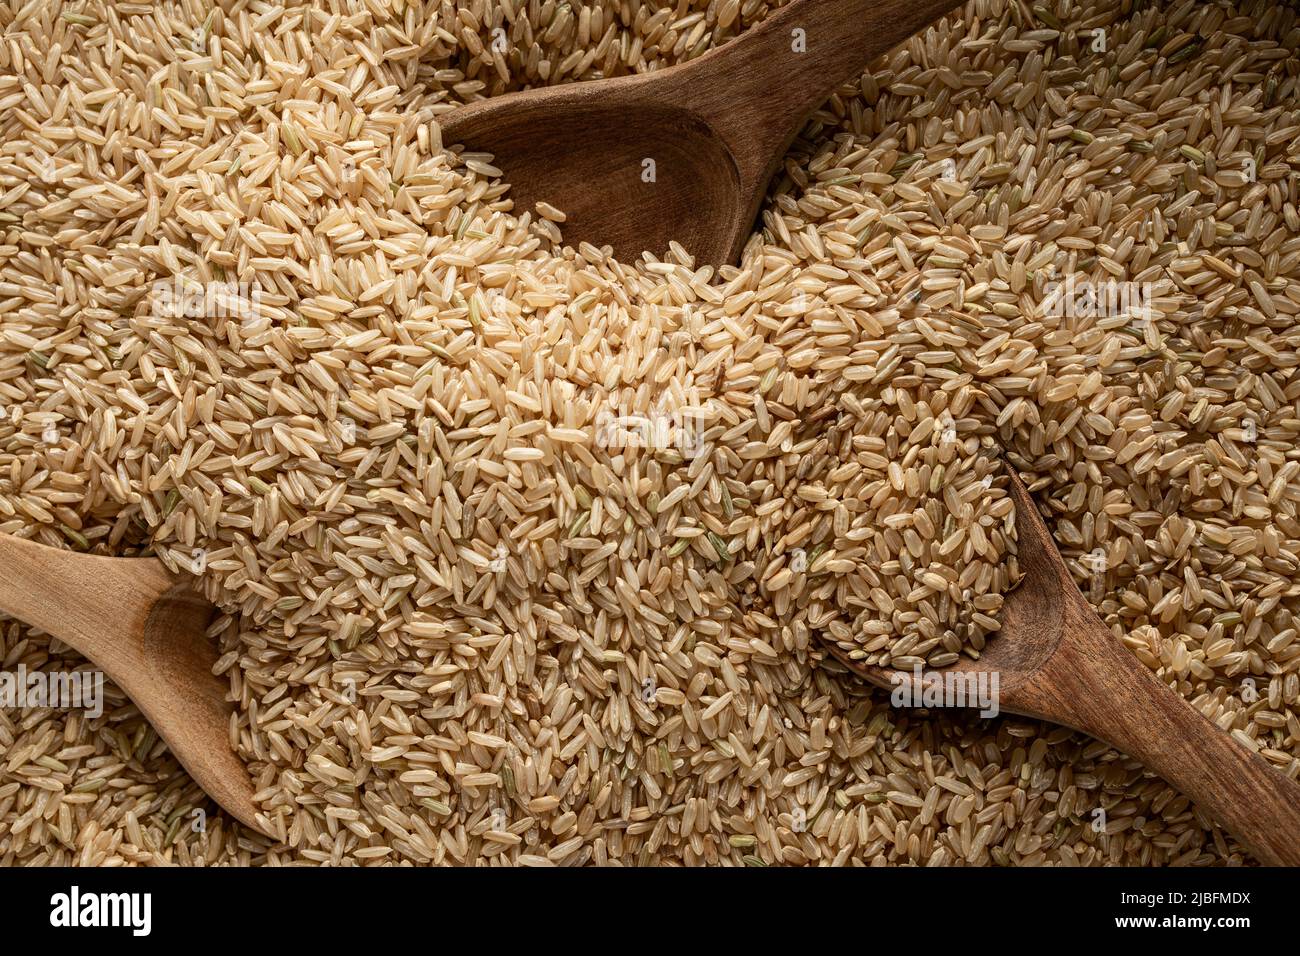 Top view of wooden spoon full of raw wholewheat rice Stock Photo